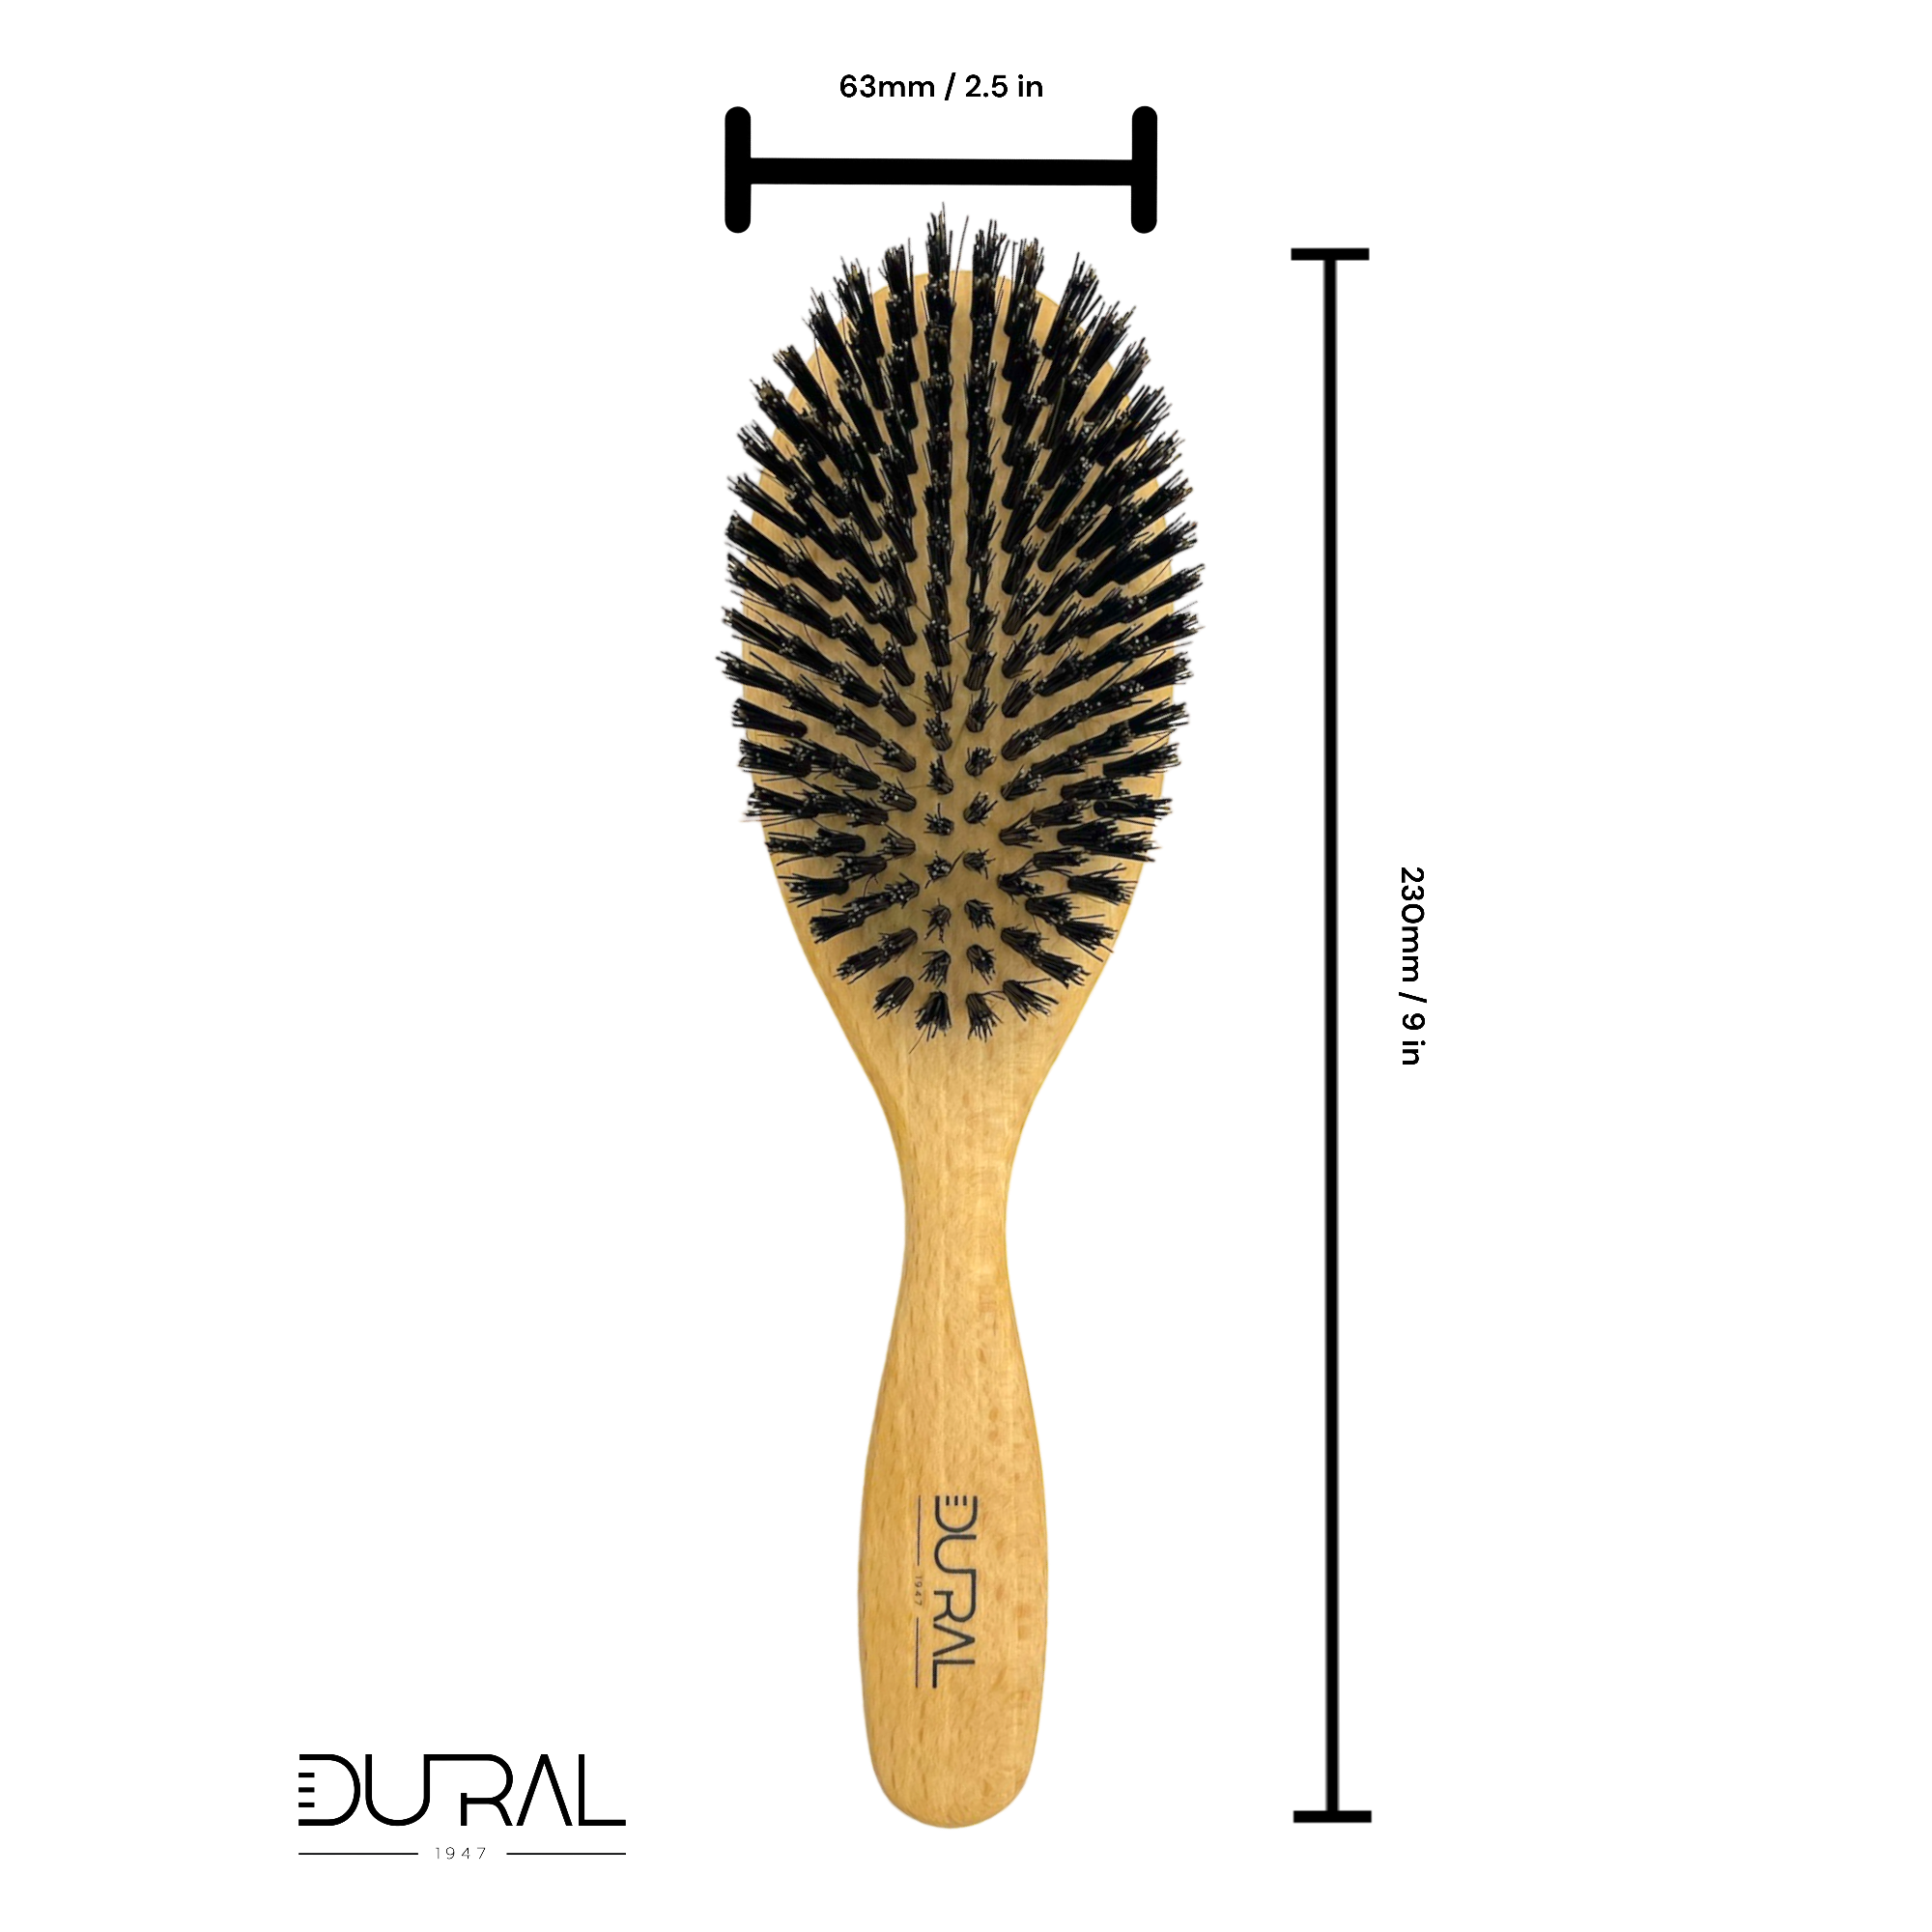 Dural Beech wood hair brush with pure boar bristles - 10 rows